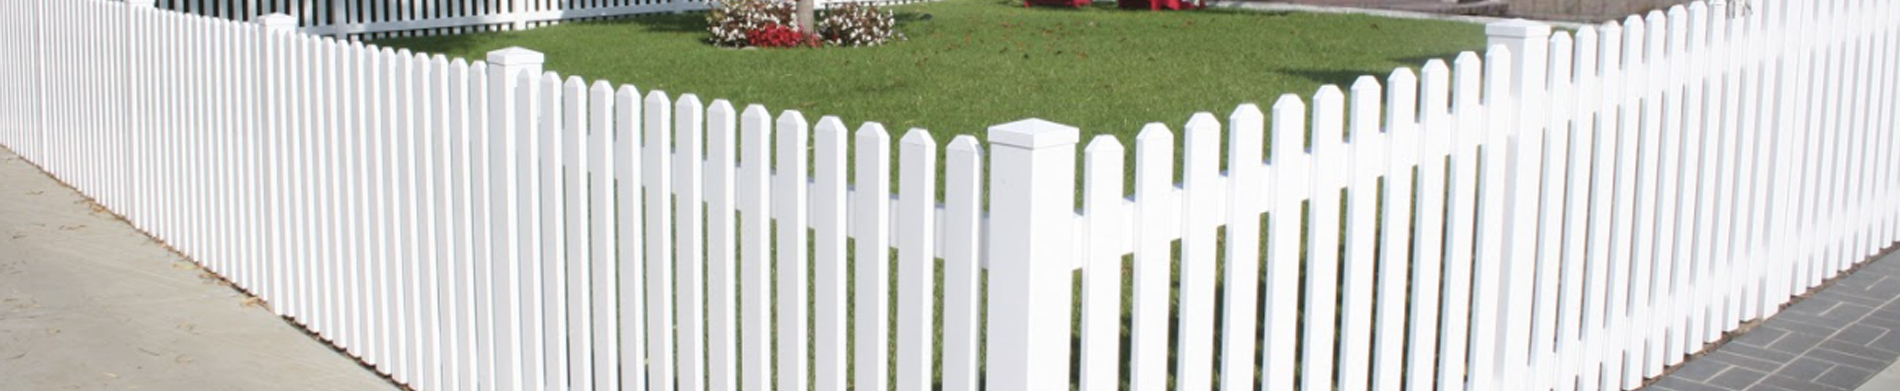 No additional maintenance required upon installing a simple backyard vinyl fence or any other style you prefer